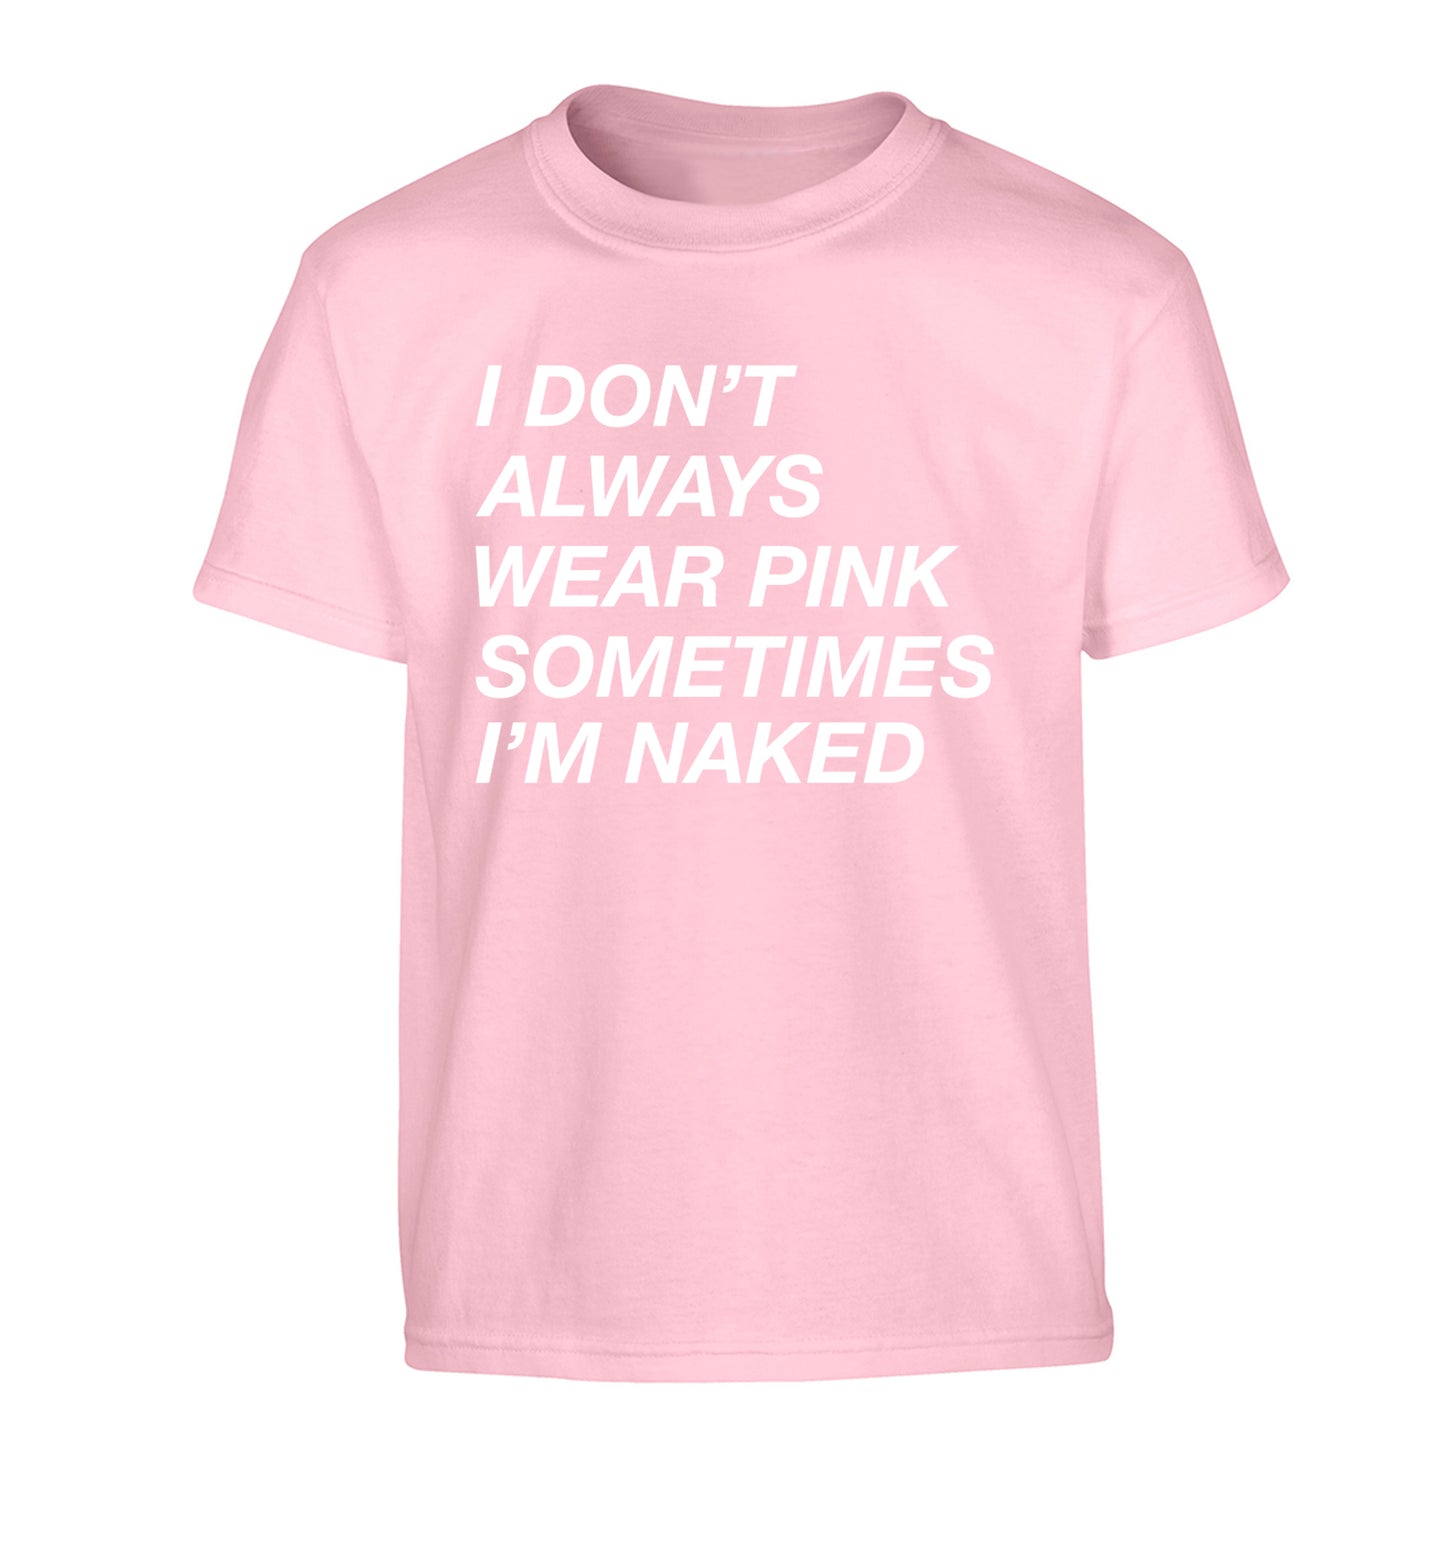 I don't always wear pink sometimes I'm naked Children's light pink Tshirt 12-13 Years